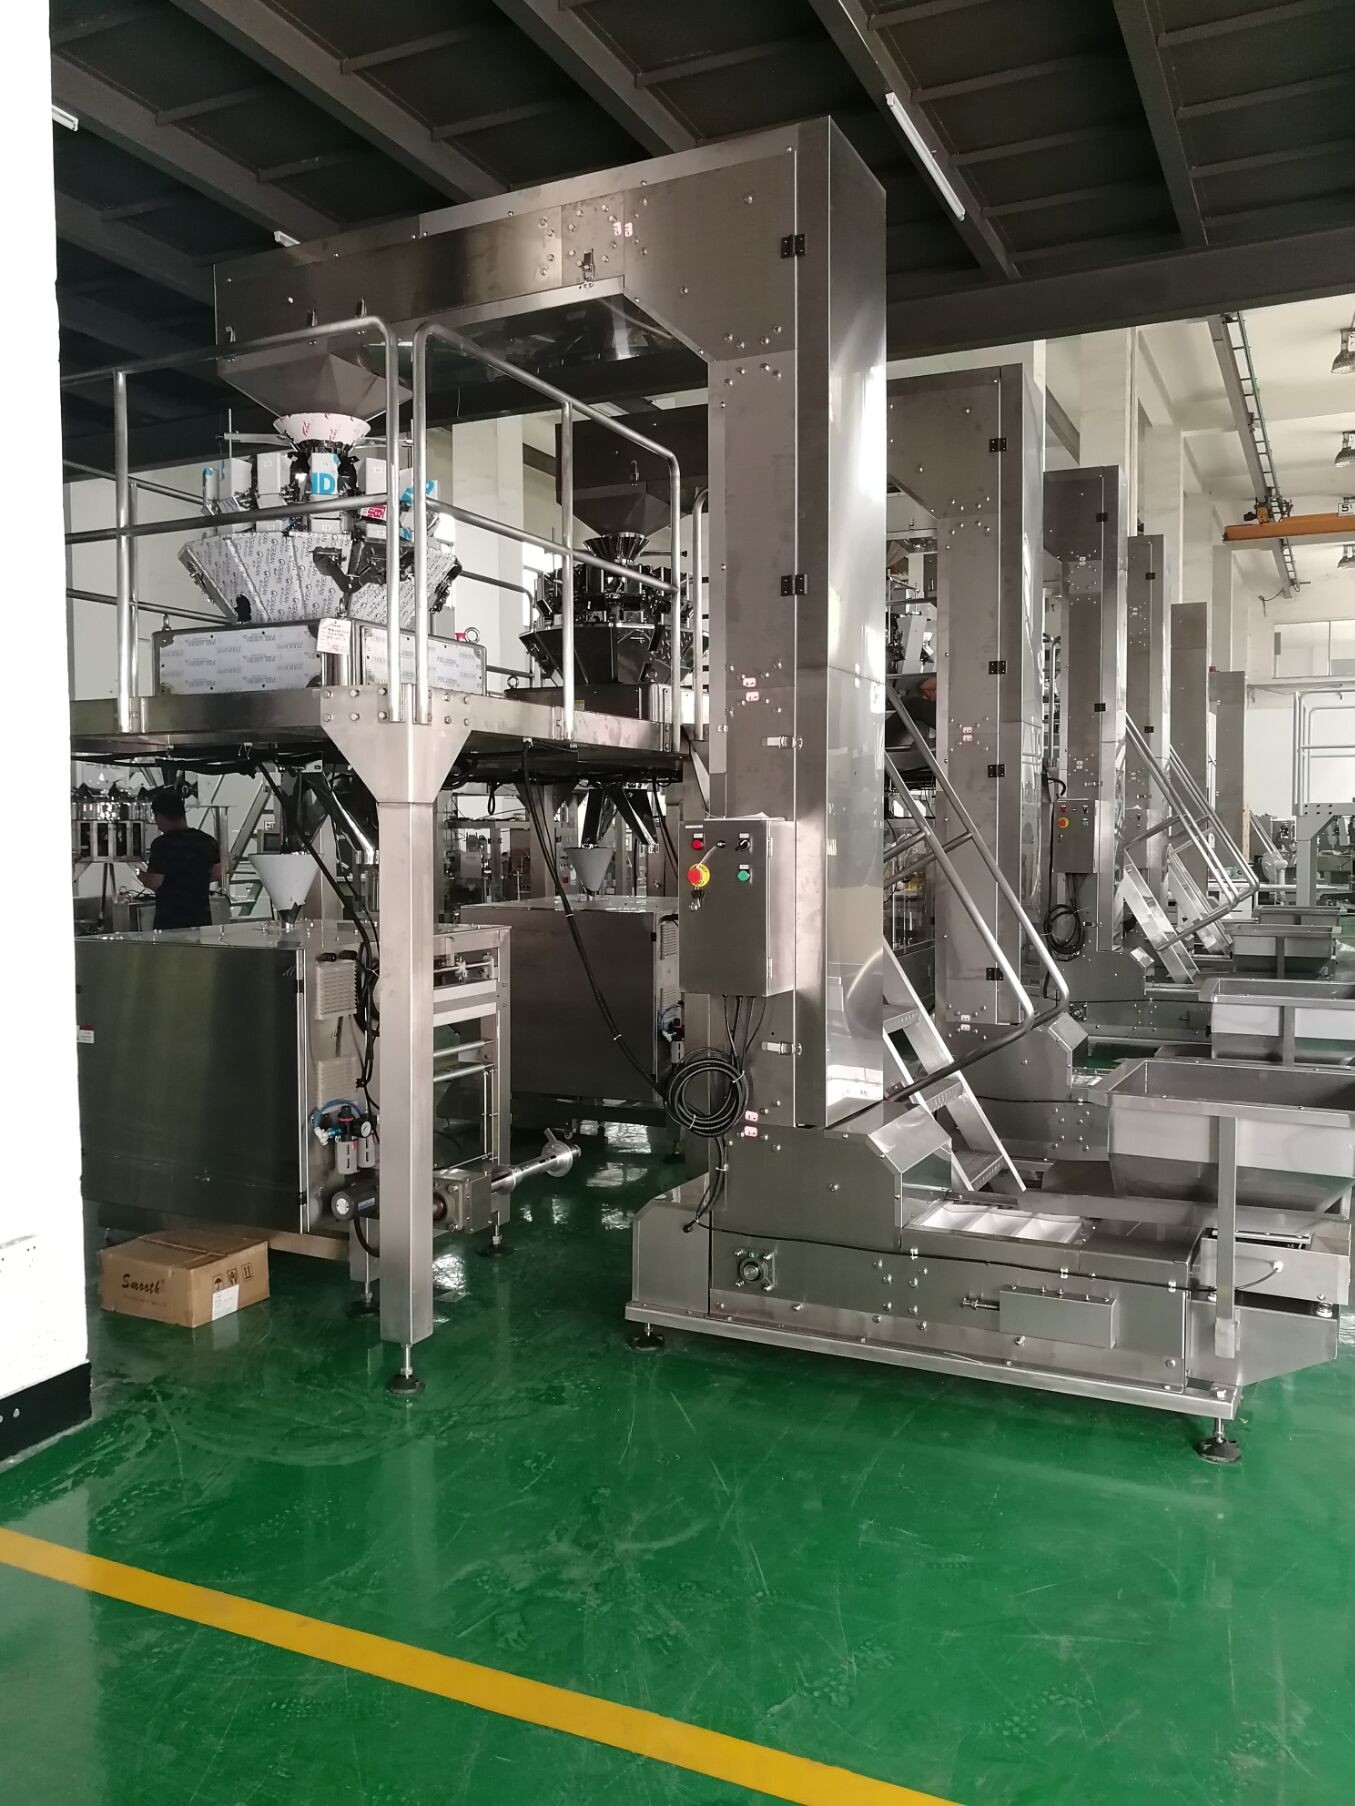 5000g 60 Bags / Min Automatic Vegetable Packing Machine